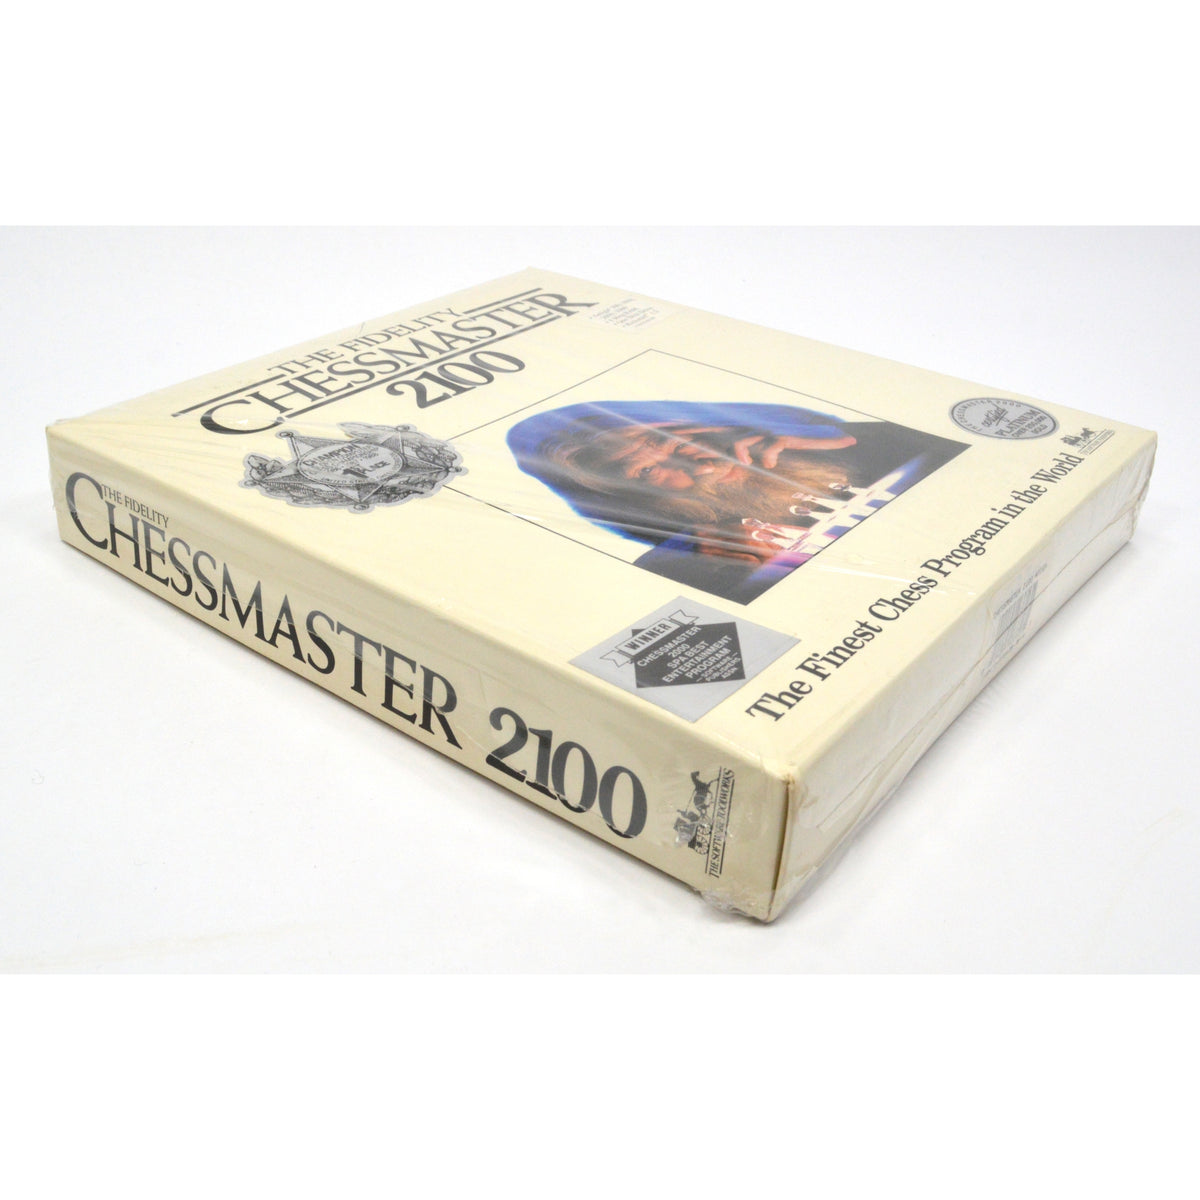 The Chessmaster 2000 Amiga Version Greeting Card for Sale by